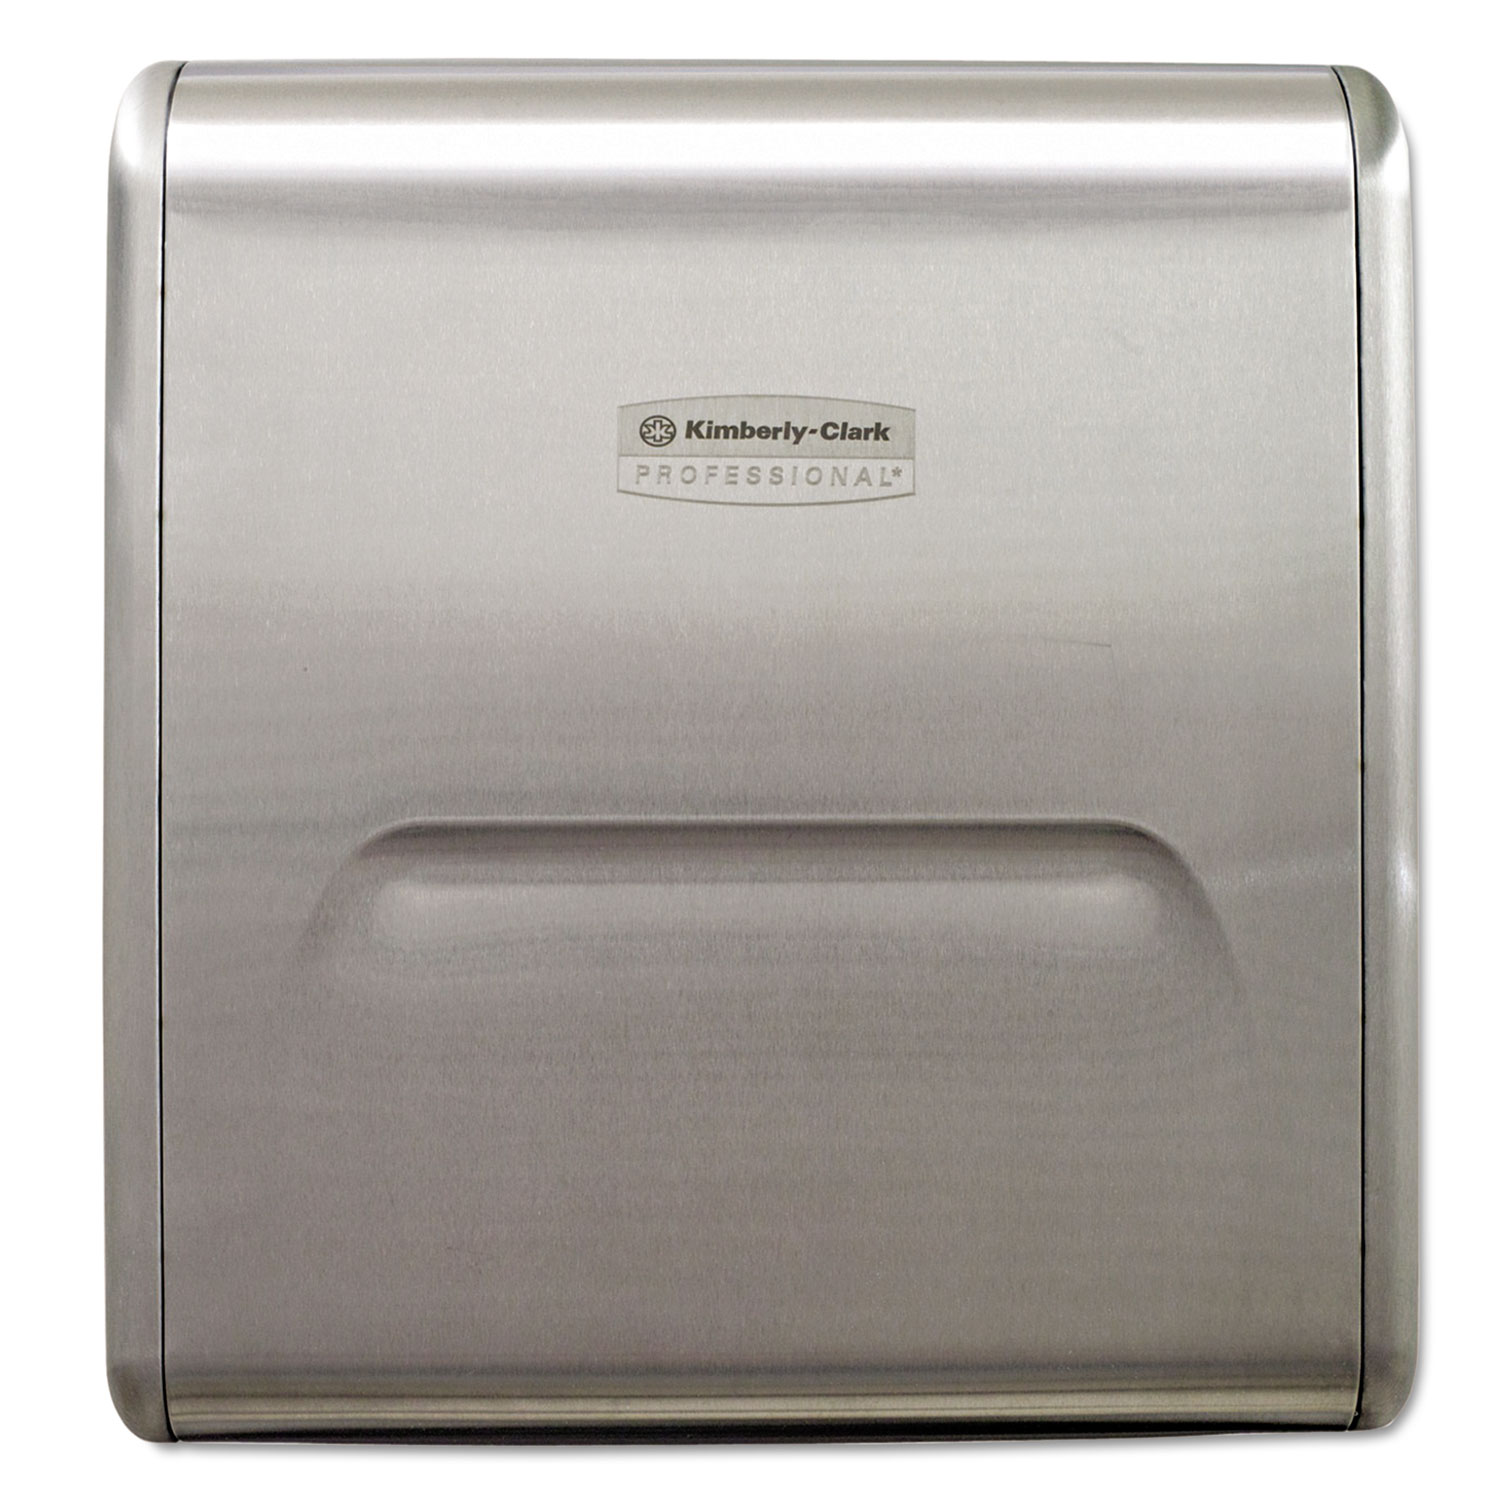 Kimberly-Clark Professional* Mod Stainless Steel Recessed Dispenser Housing, 11.13 x 4 x 15.37